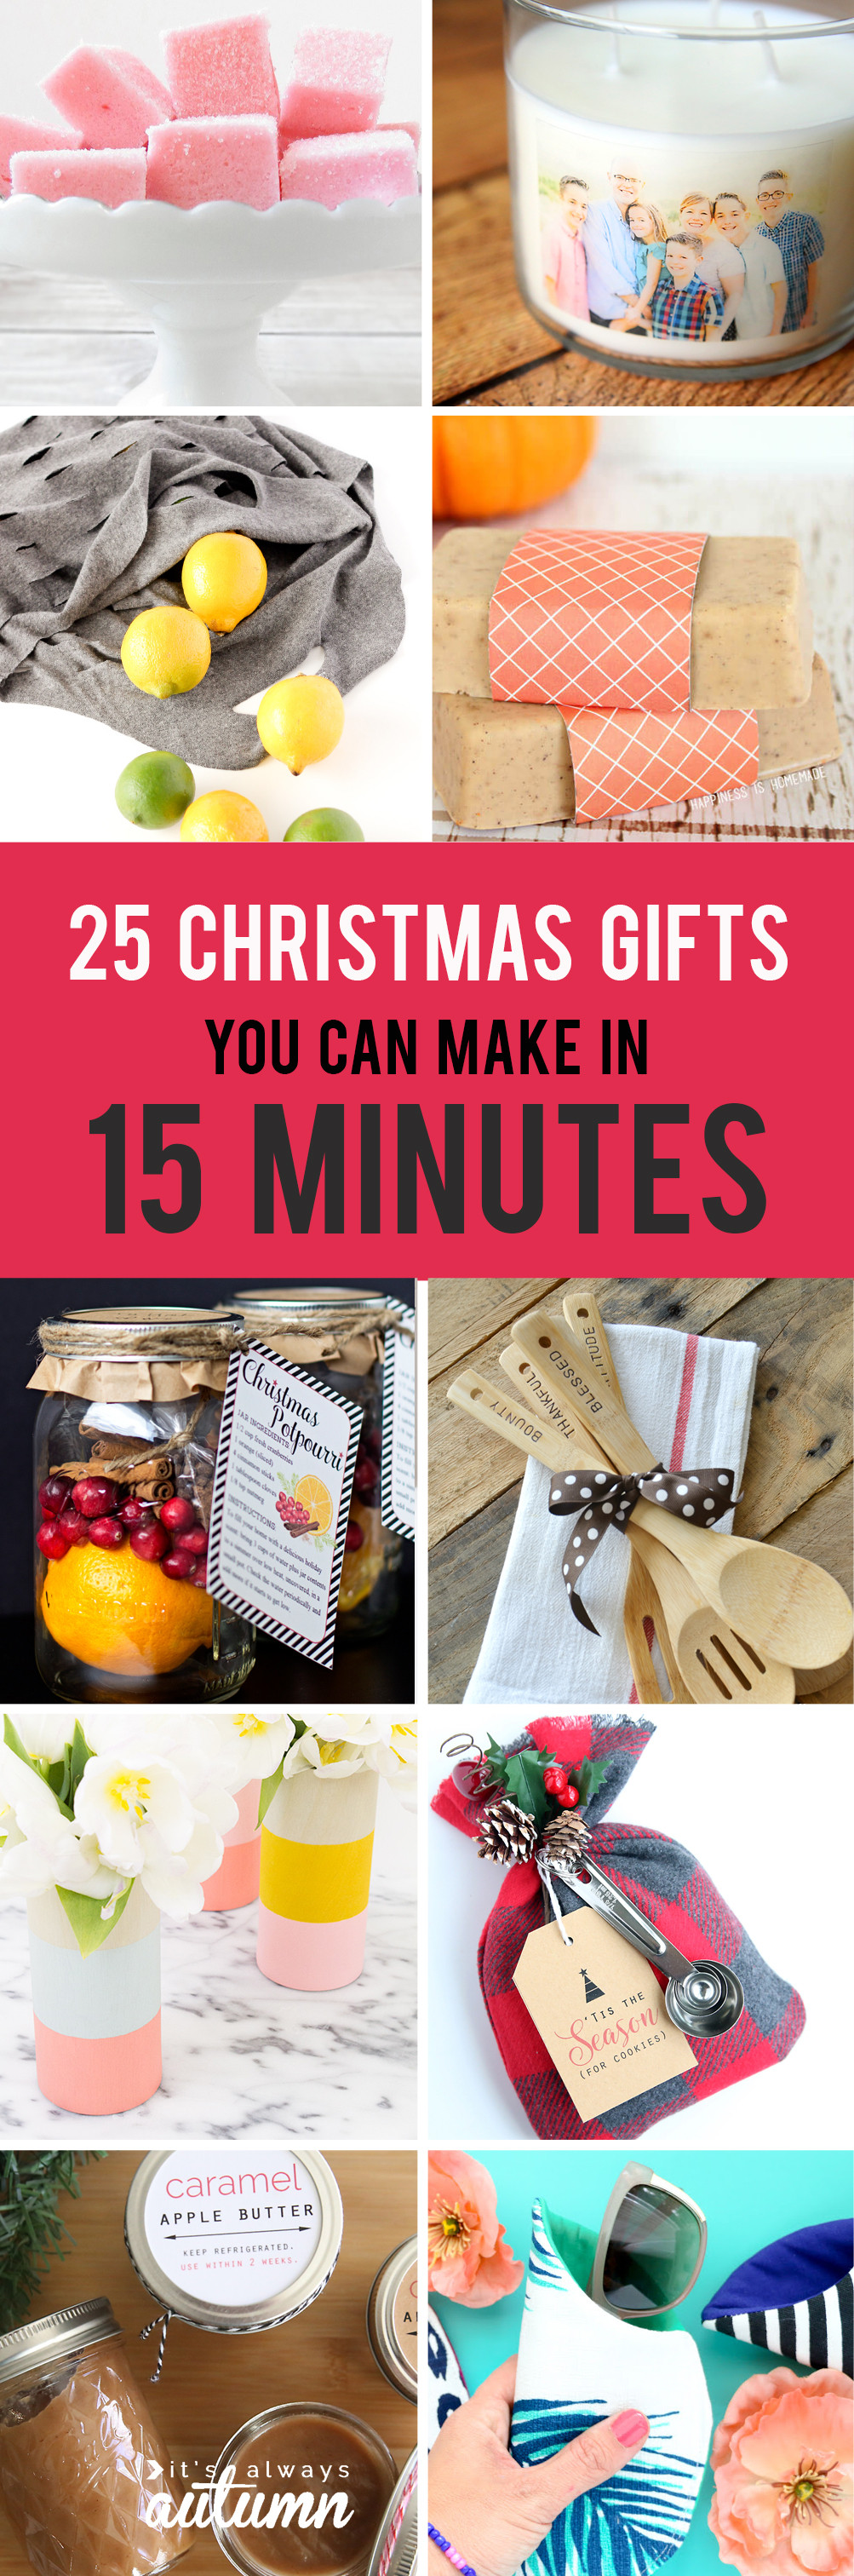 Unique DIY Christmas Gifts
 25 easy homemade Christmas ts you can make in 15